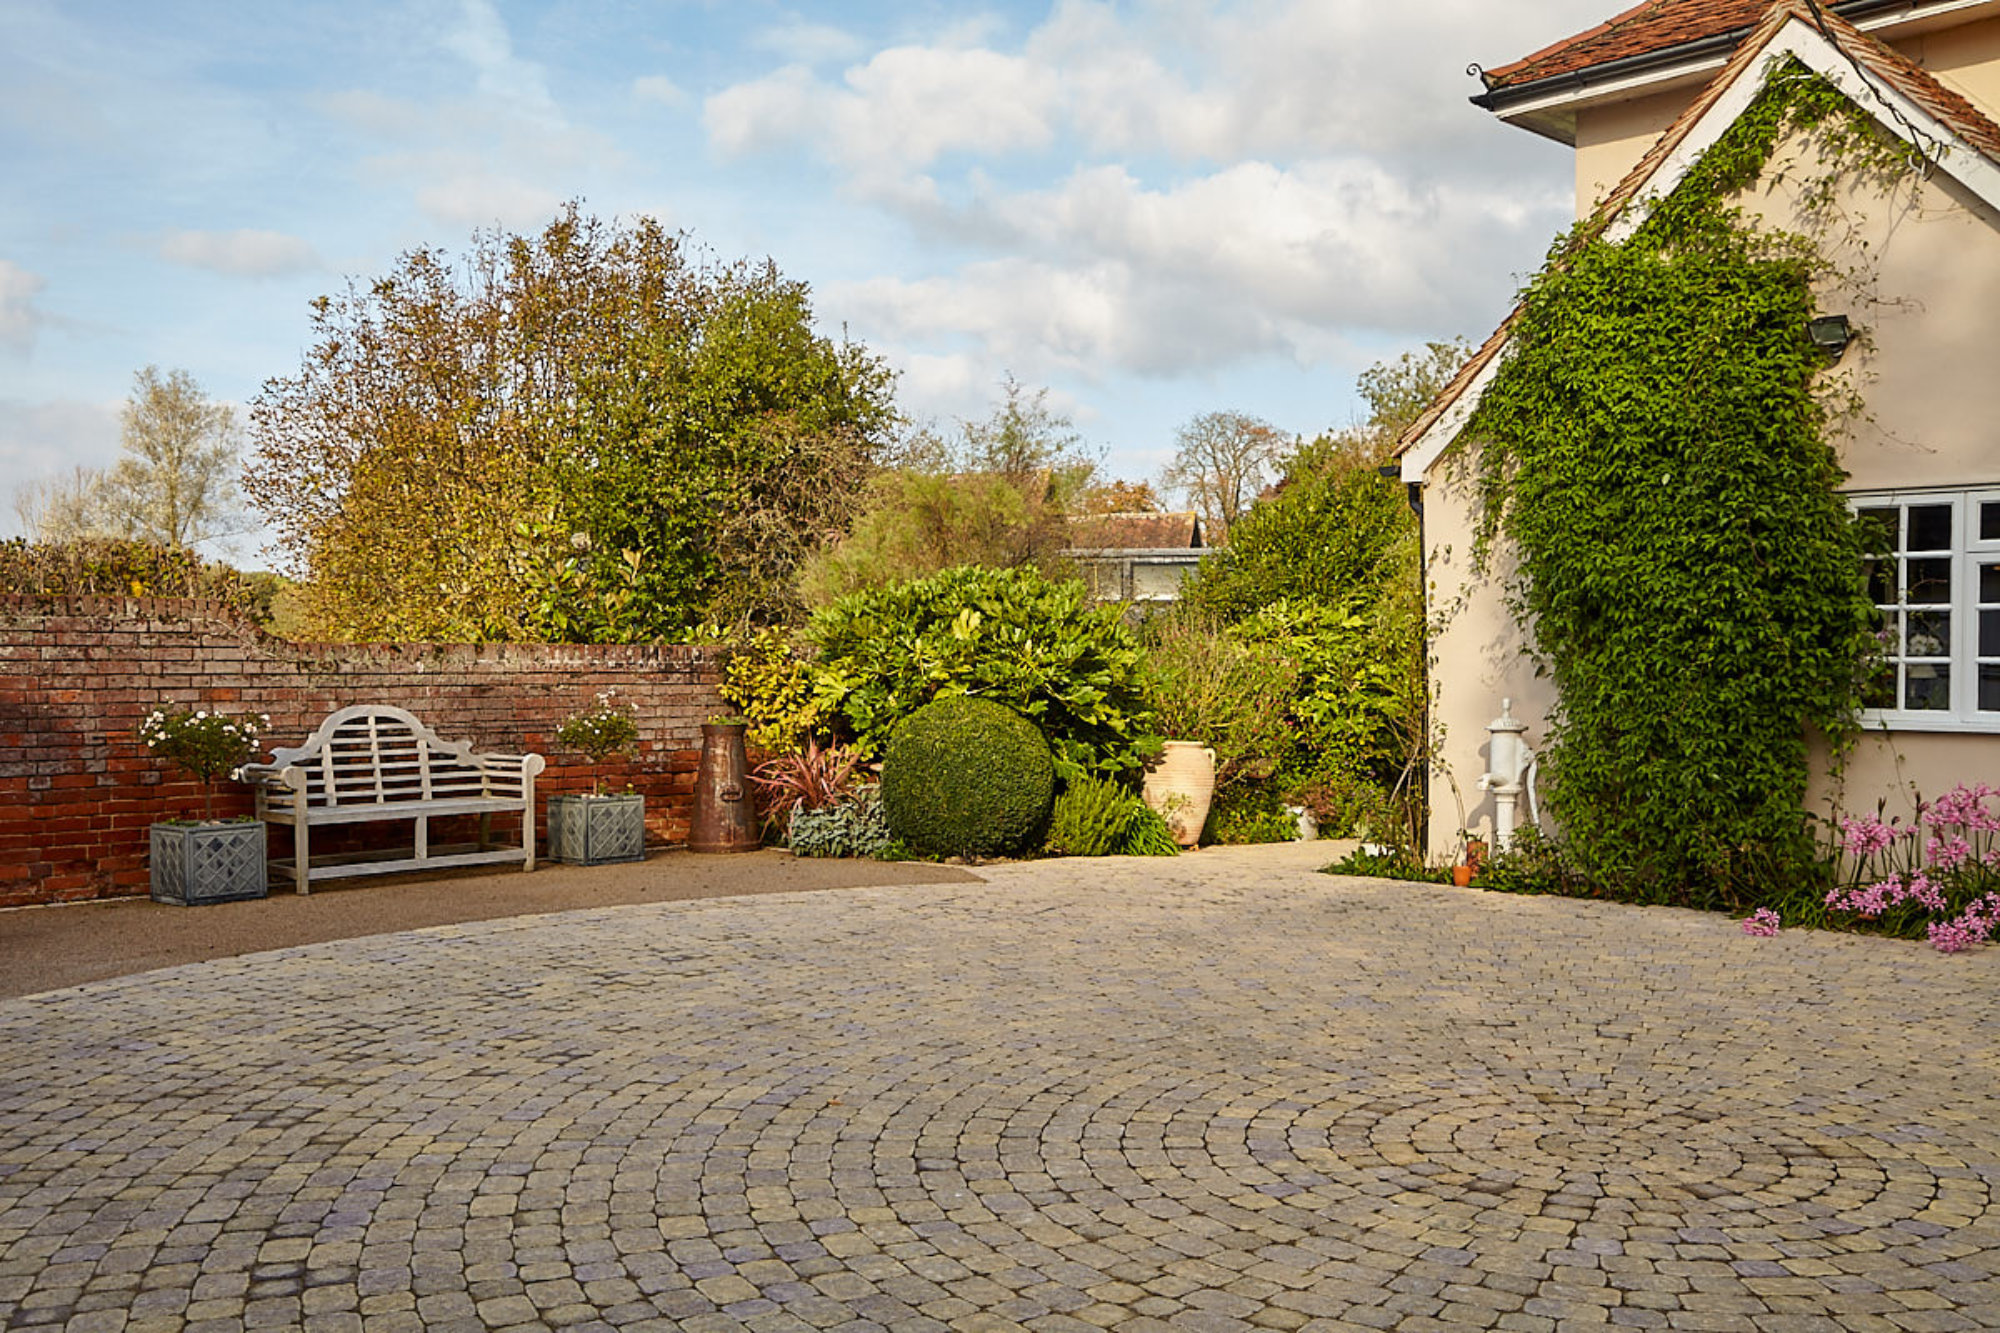 A Rustic and Charming Driveway Entrance with Aura Block Paving